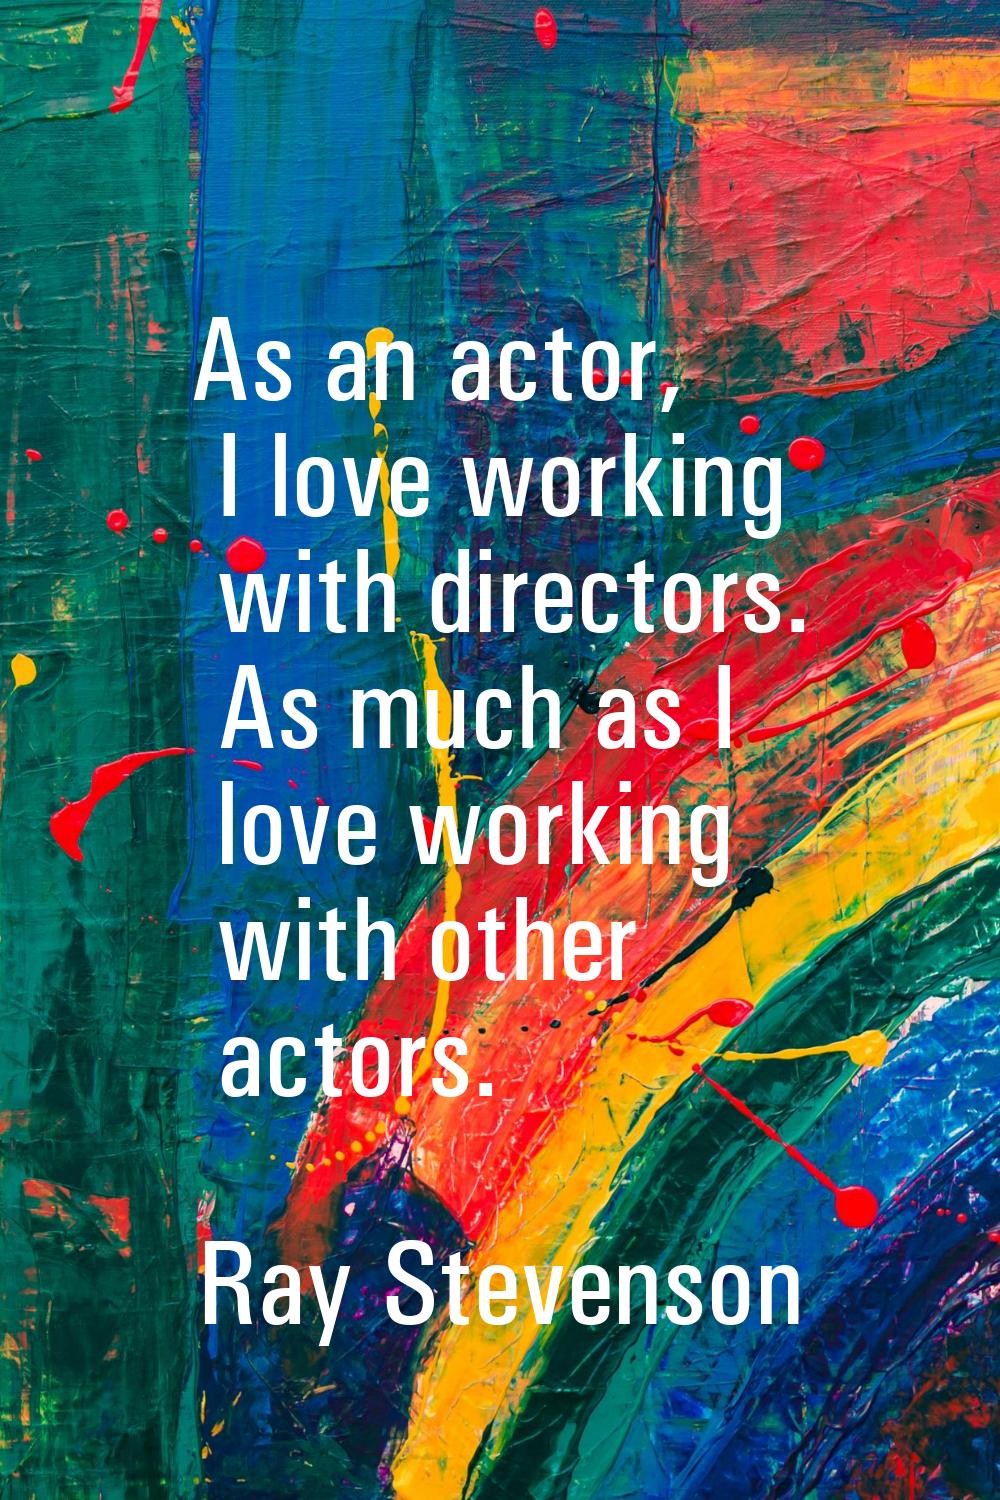 As an actor, I love working with directors. As much as I love working with other actors.